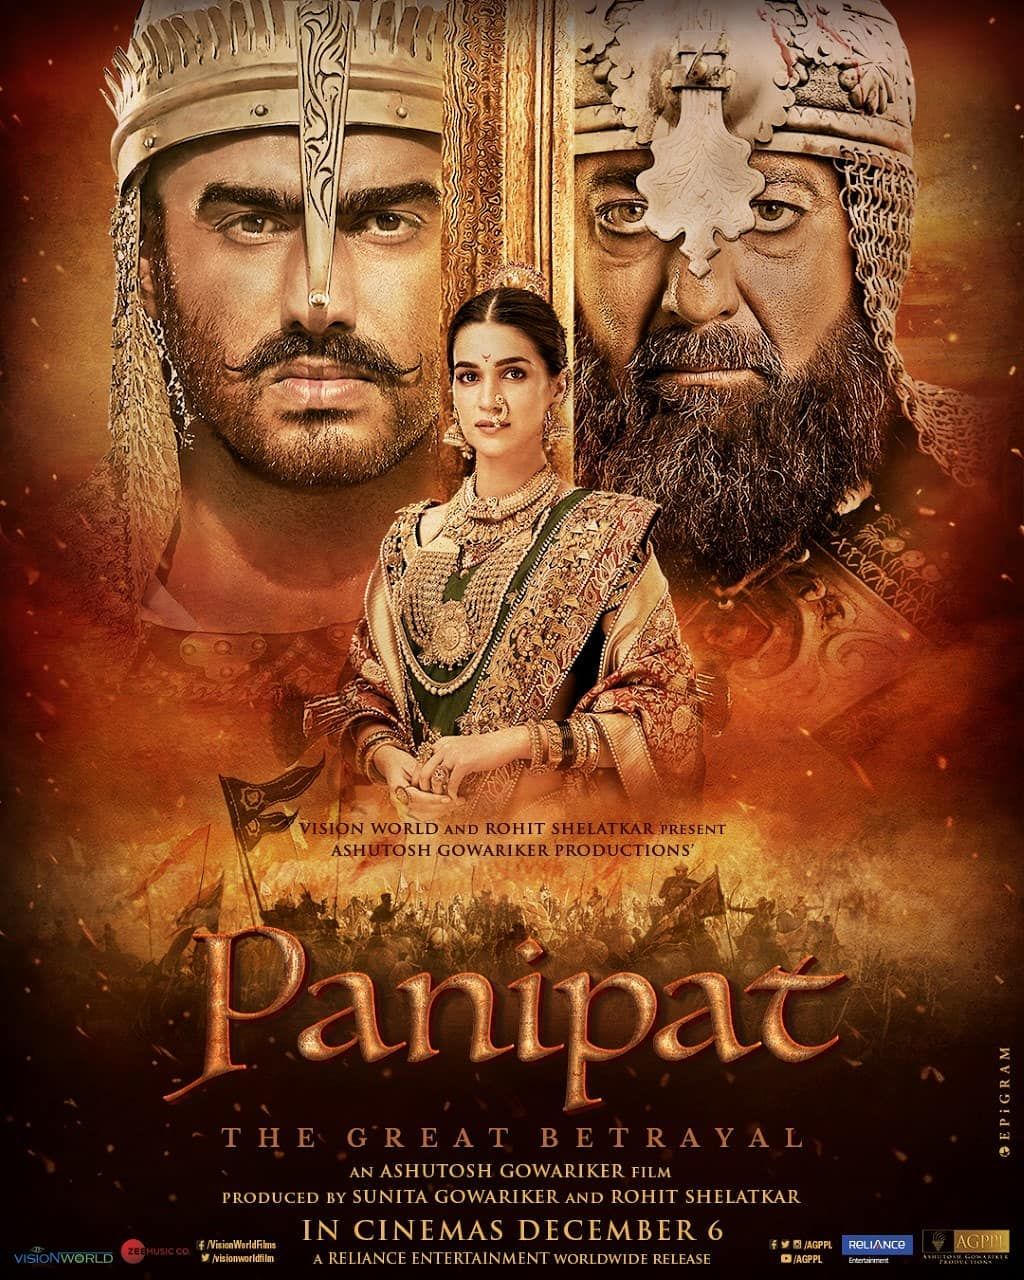 Descendant Of Raja Surajmal Demands Ban On Panipat After Watching The Film For Depicting The Ruler In An 'Unseemly Light'